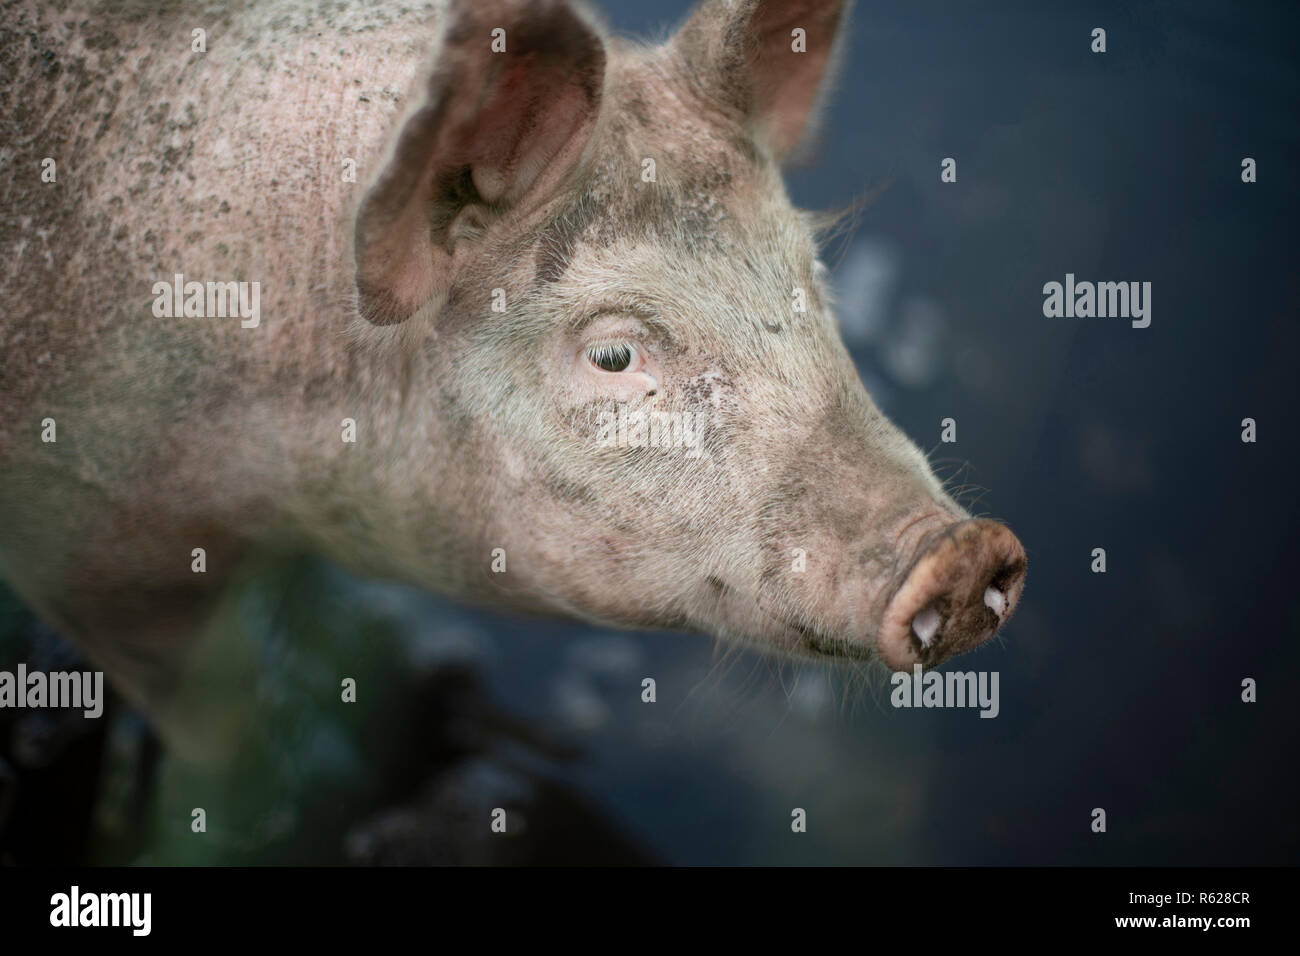 Dreamy close up portrait of a young pig, piglet, from a high angle with a hazy bleary blurred background. Stock Photo